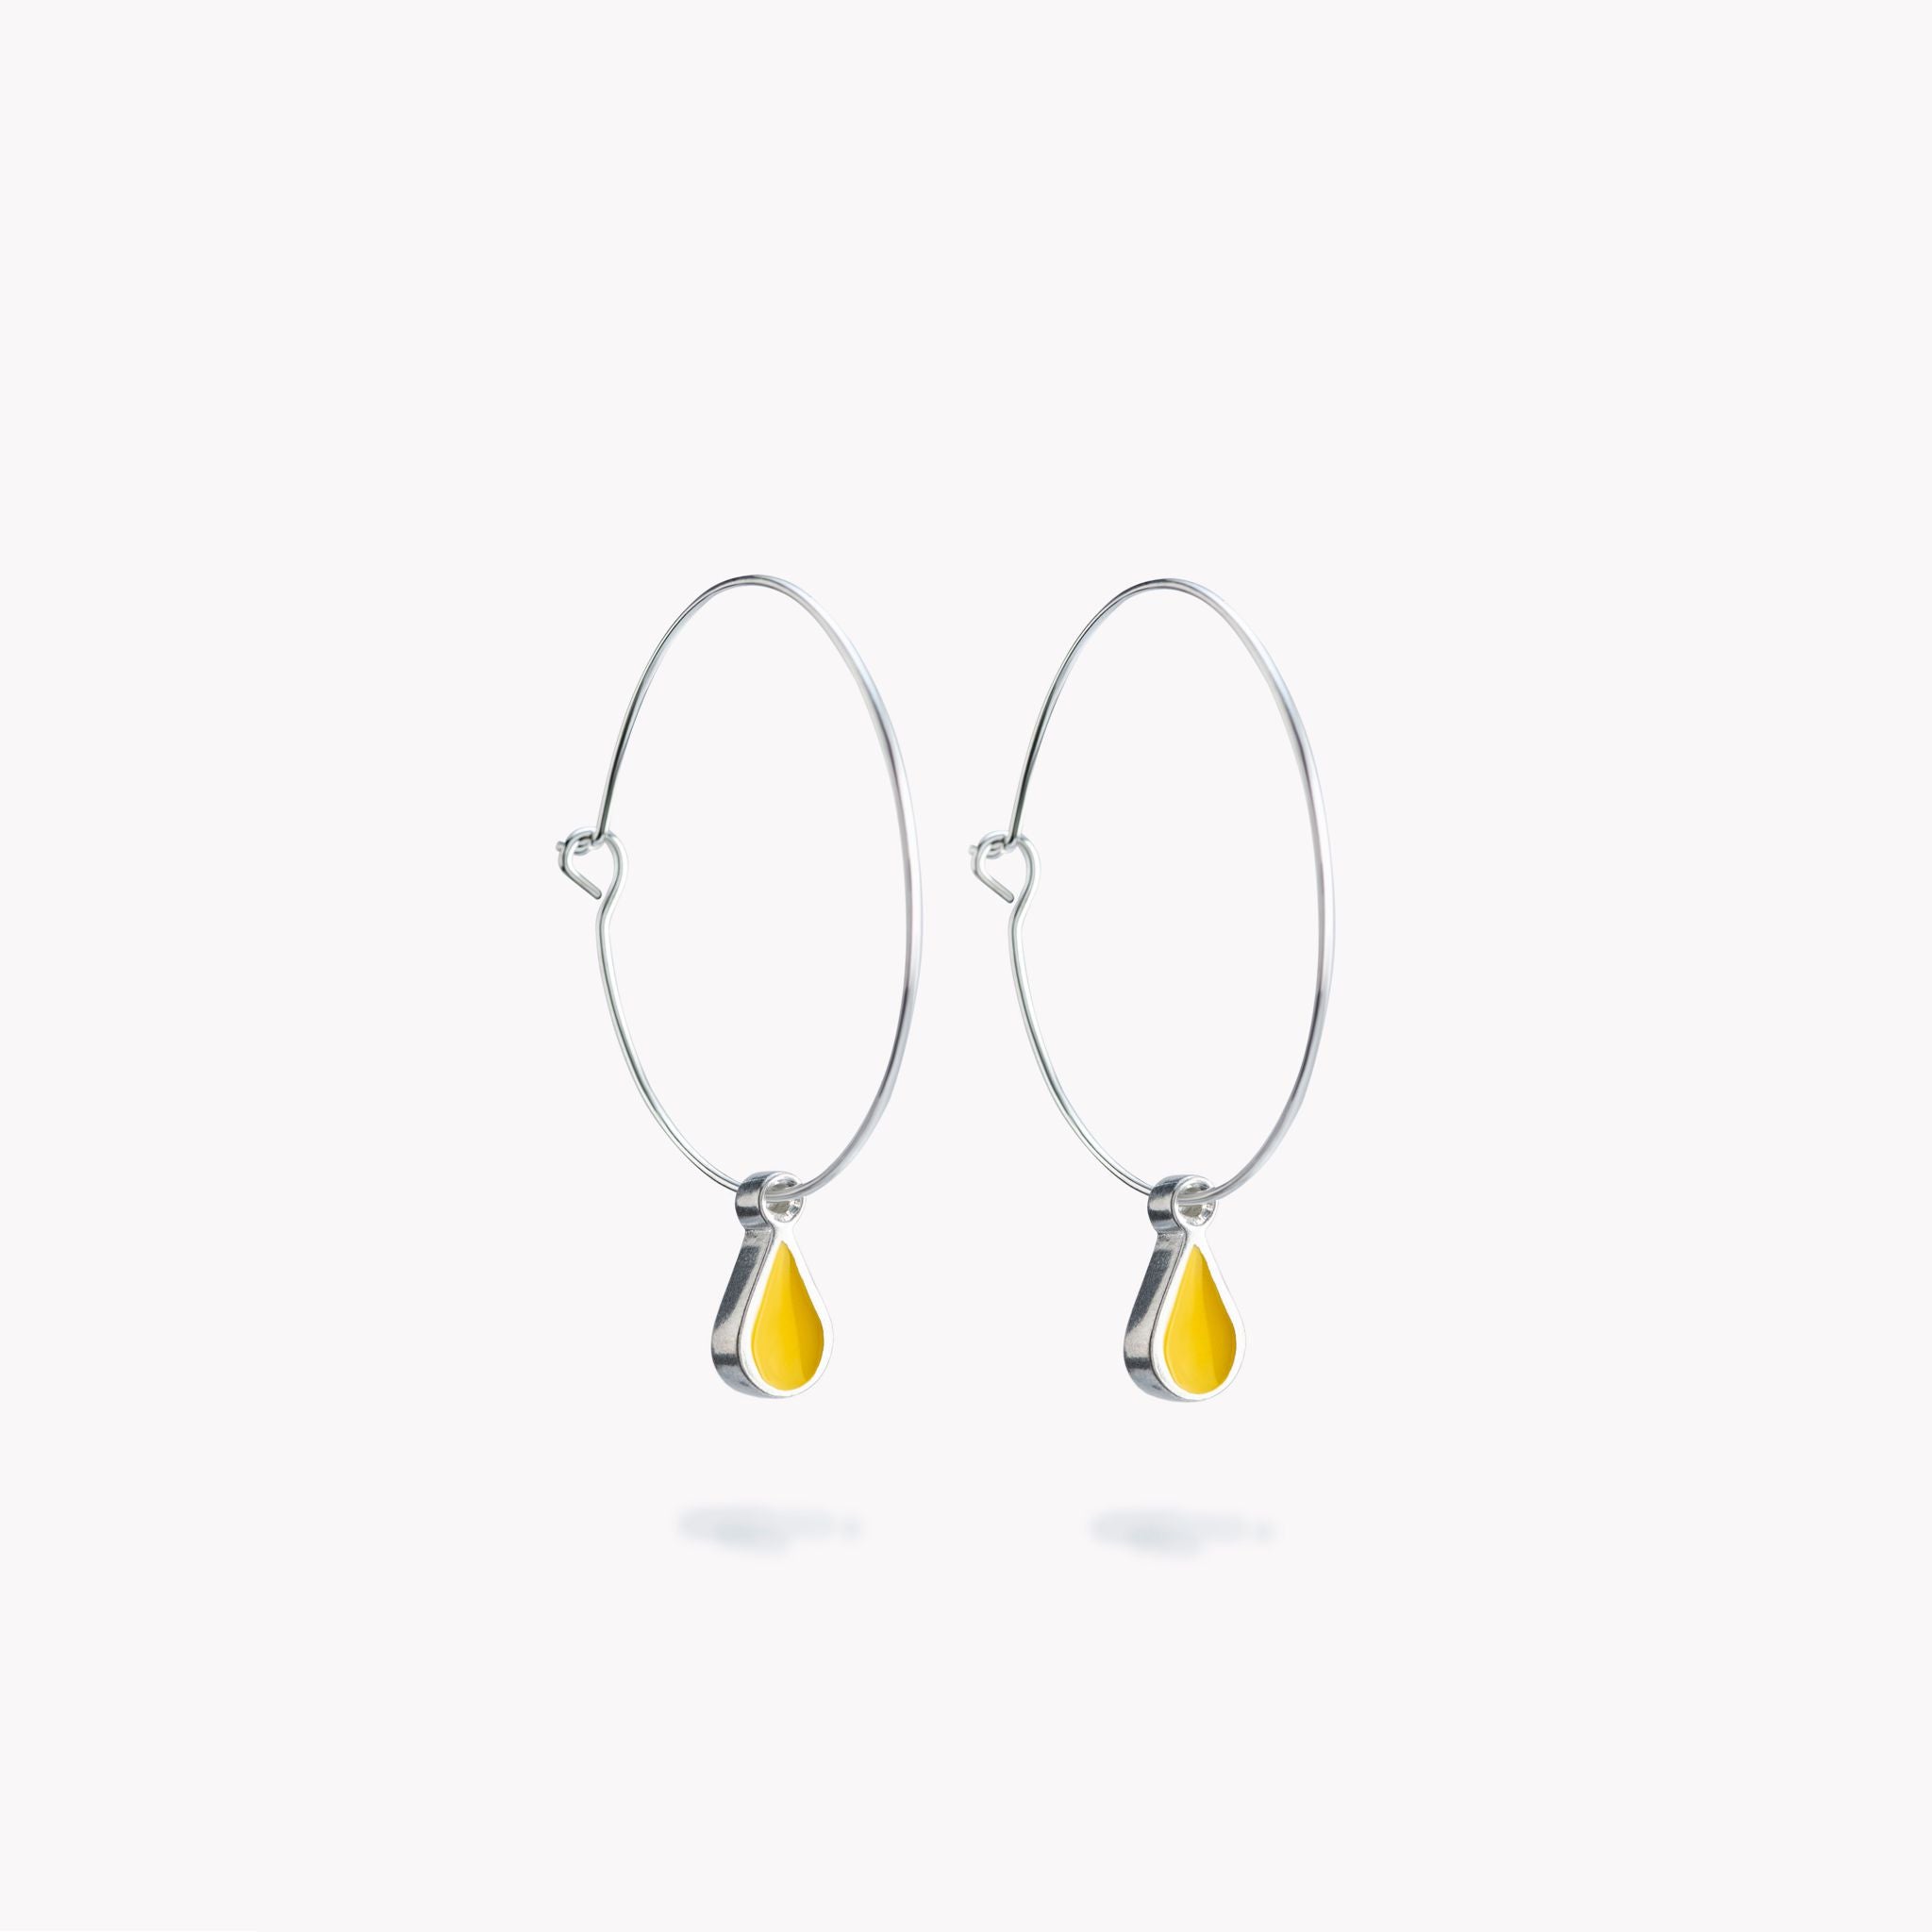 A simple pair of hoop earrings with yellow hanging droplets.